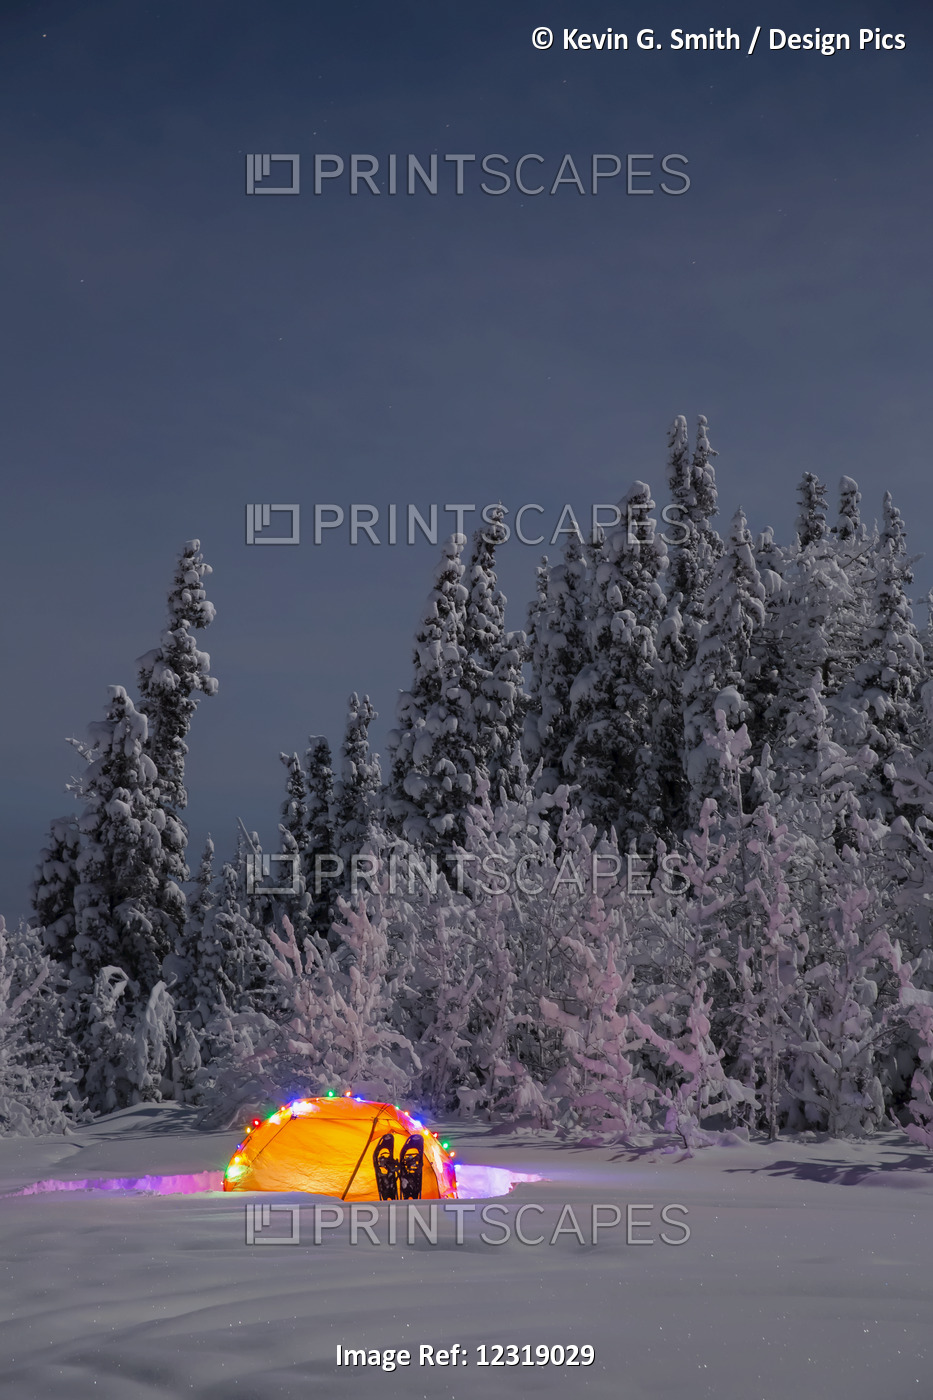 Moonlight Over A Lit Tent With Christmas Lights Near A Snow Covered Forest, ...